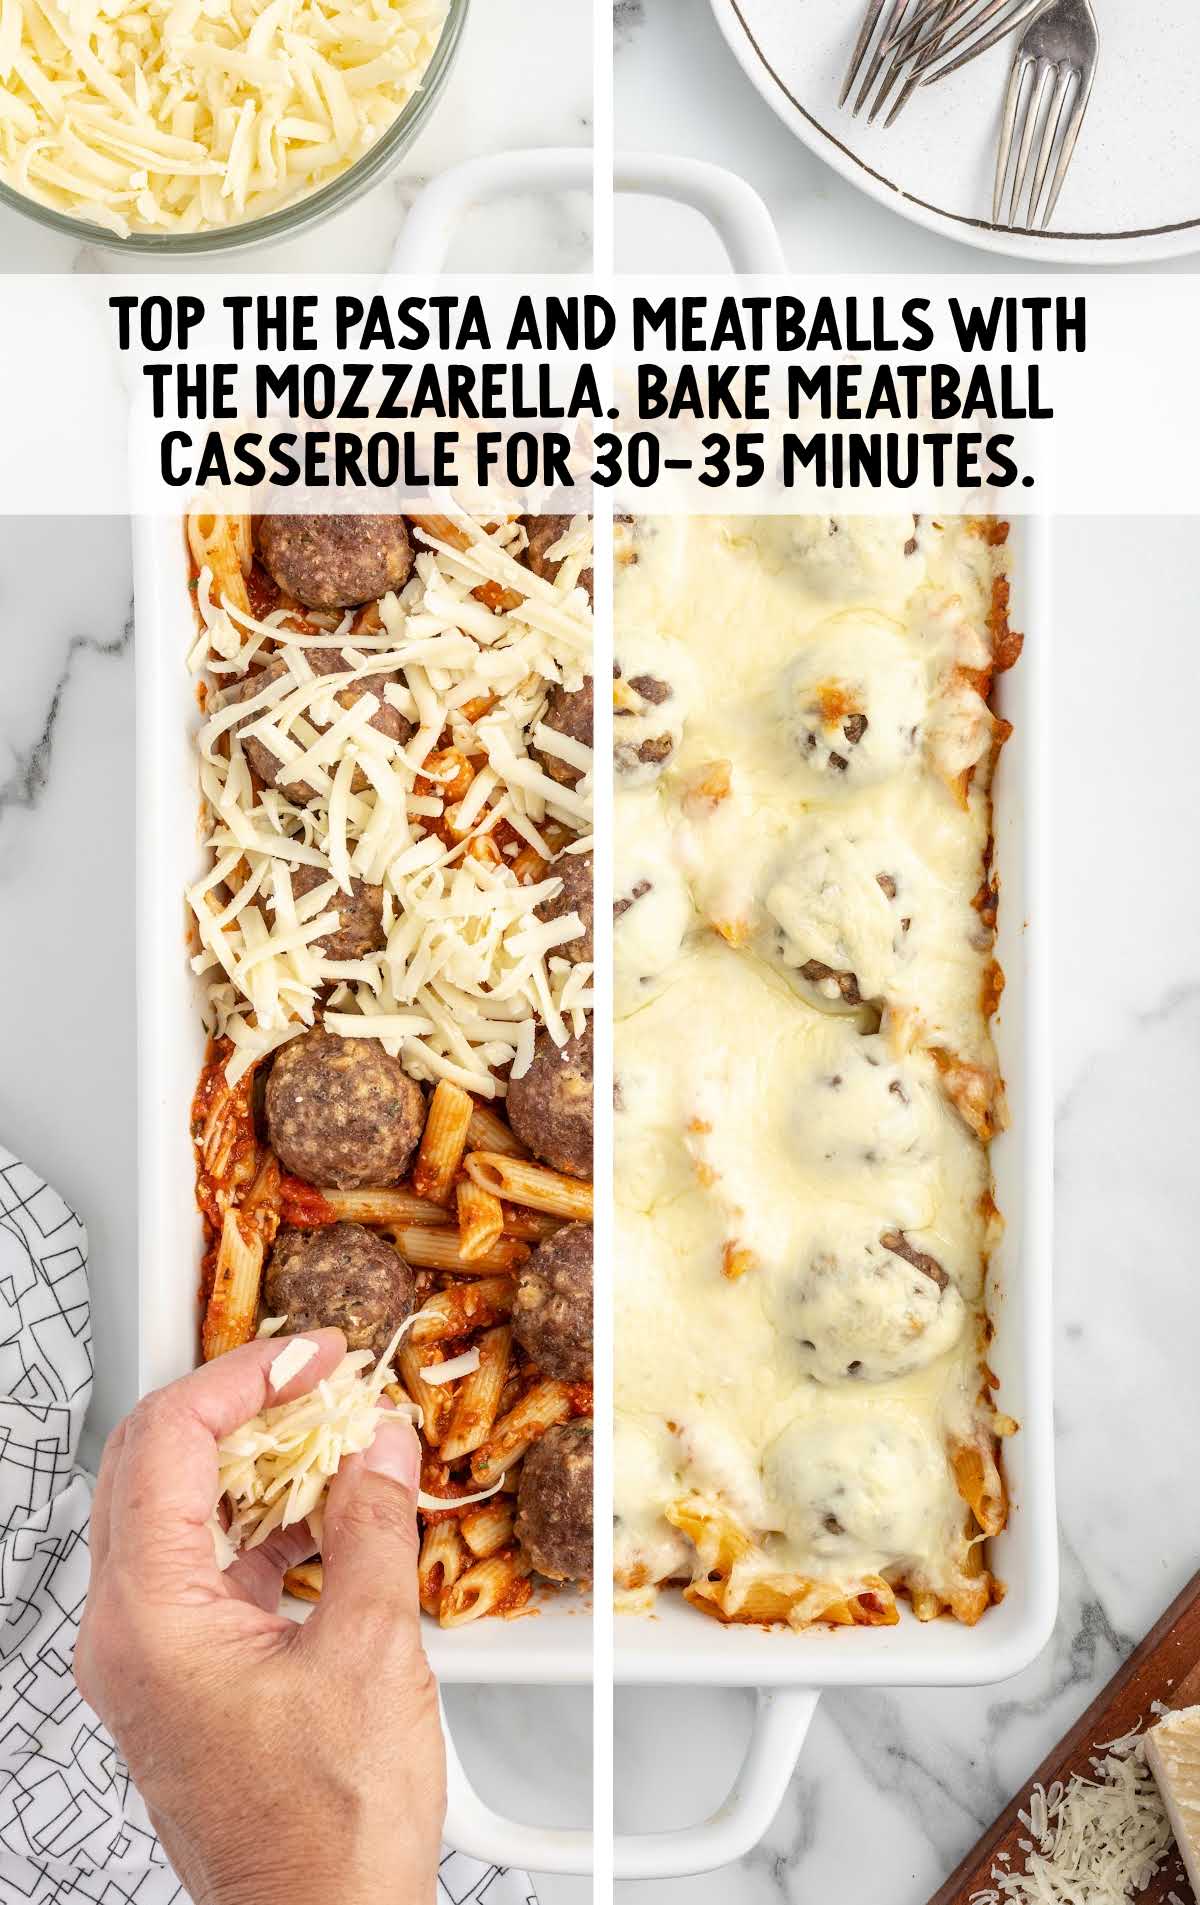 mozzarella topped over the pasta and meatballs and bake